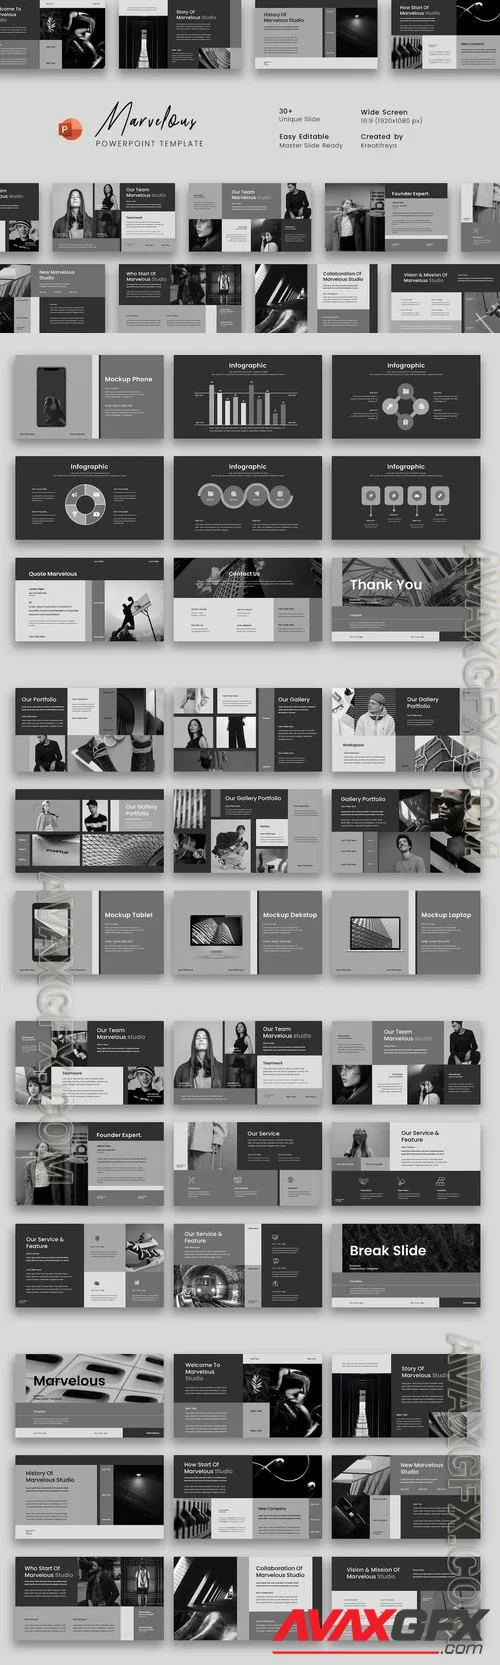 Marvelous - Business PowerPoint Template 44G3ZK6 [PPTX]